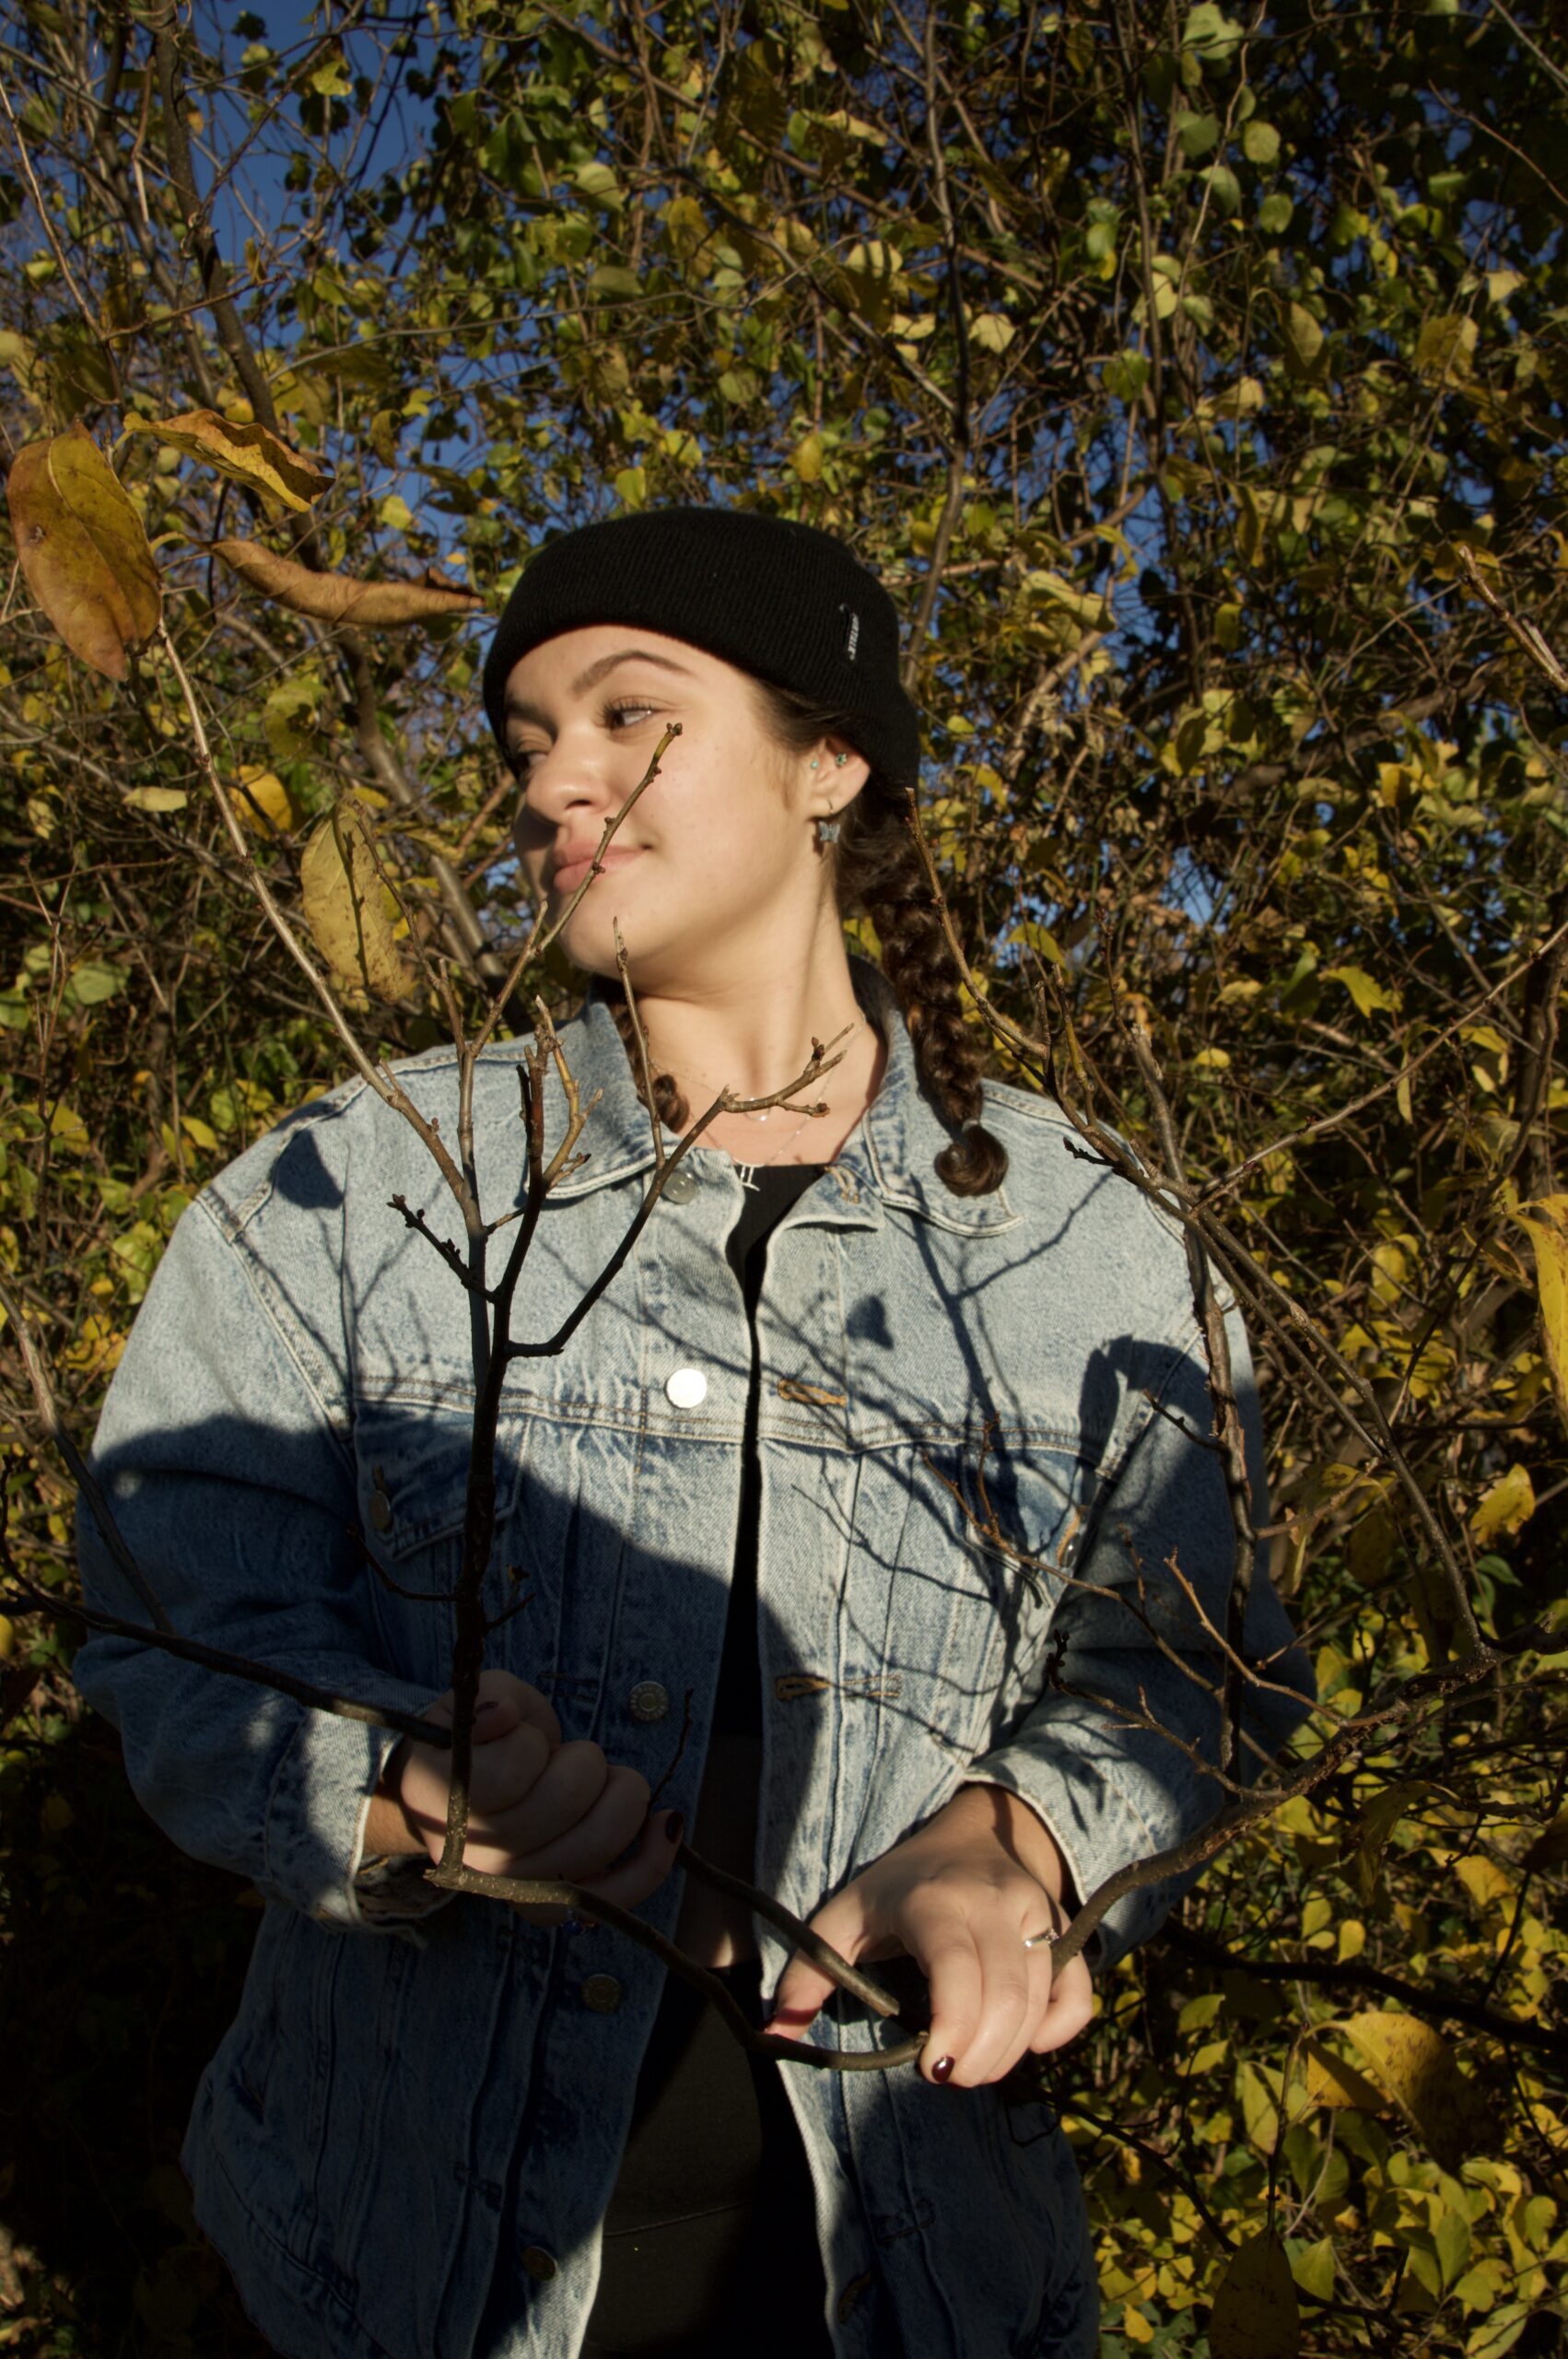 Girl in a denim jacket and a black beanie looks to the left as her hands wrap around tree branches. She is surrounded by green and yellow leaves and trees